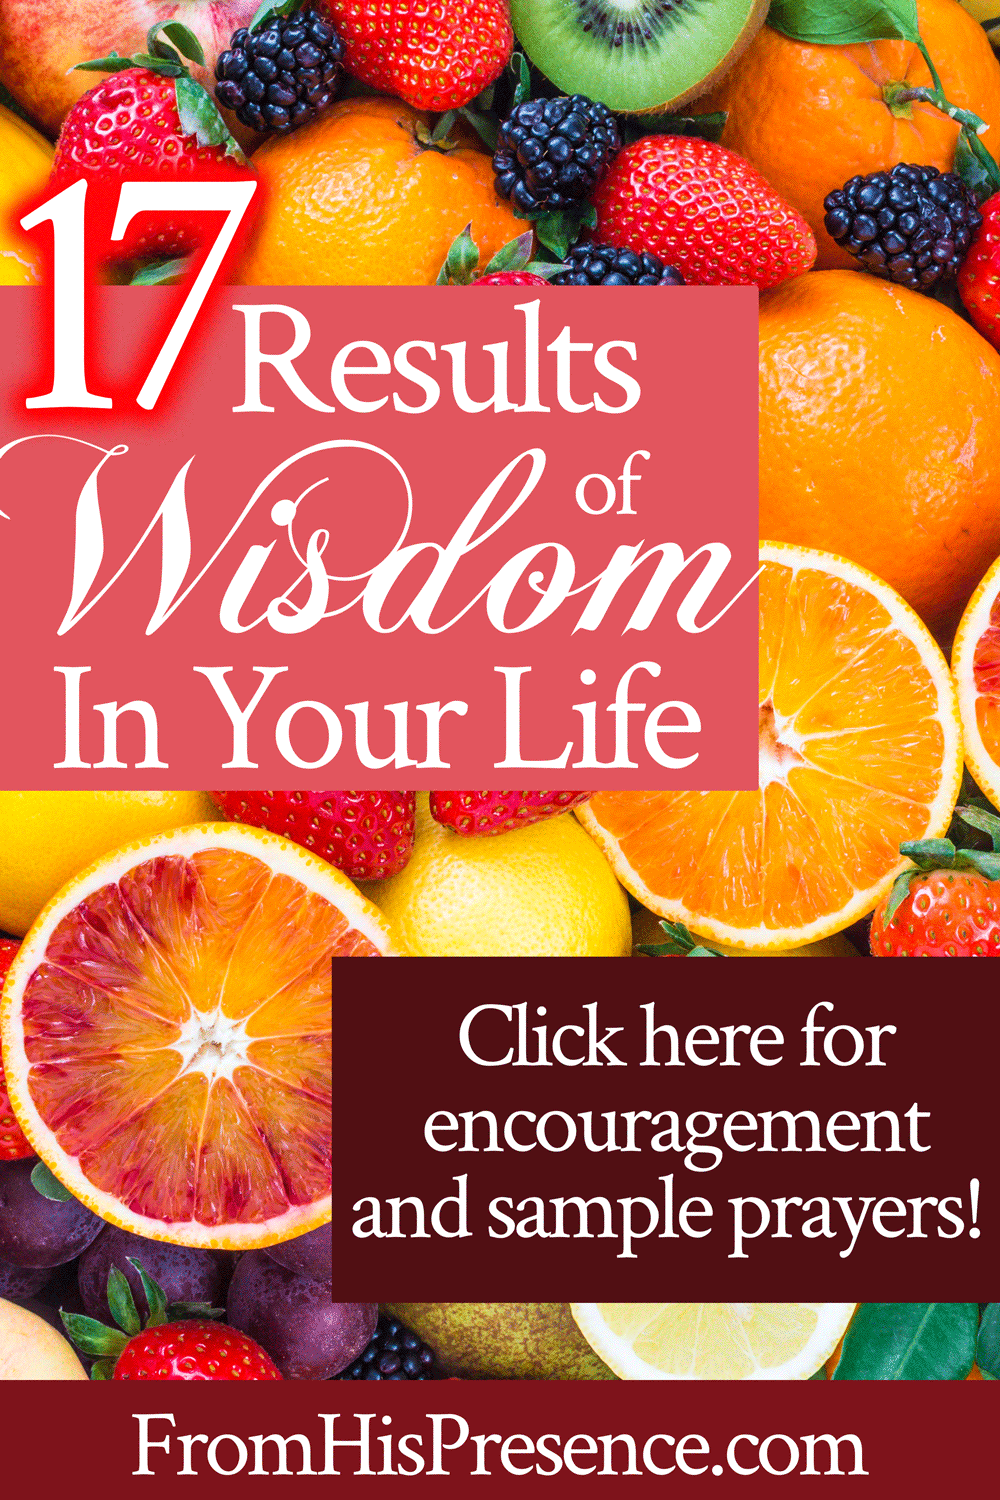 17 Results of Wisdom In Your Life | by Jamie Rohrbaugh | FromHisPresence.com